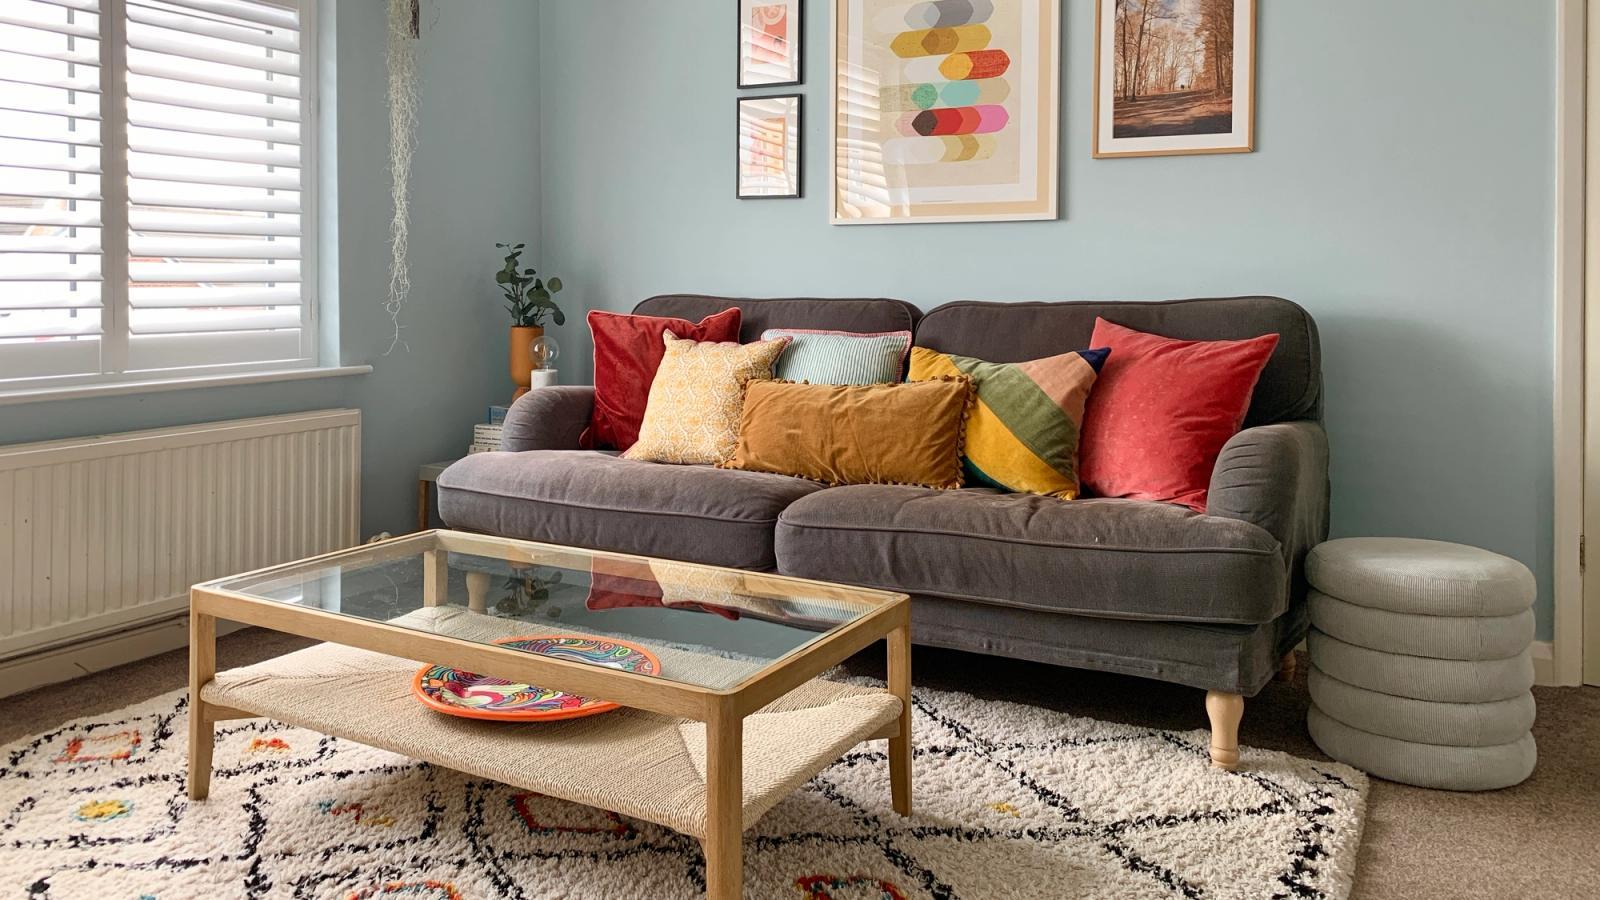 Thumbnail relating to an article titled "Living Room Refresh"